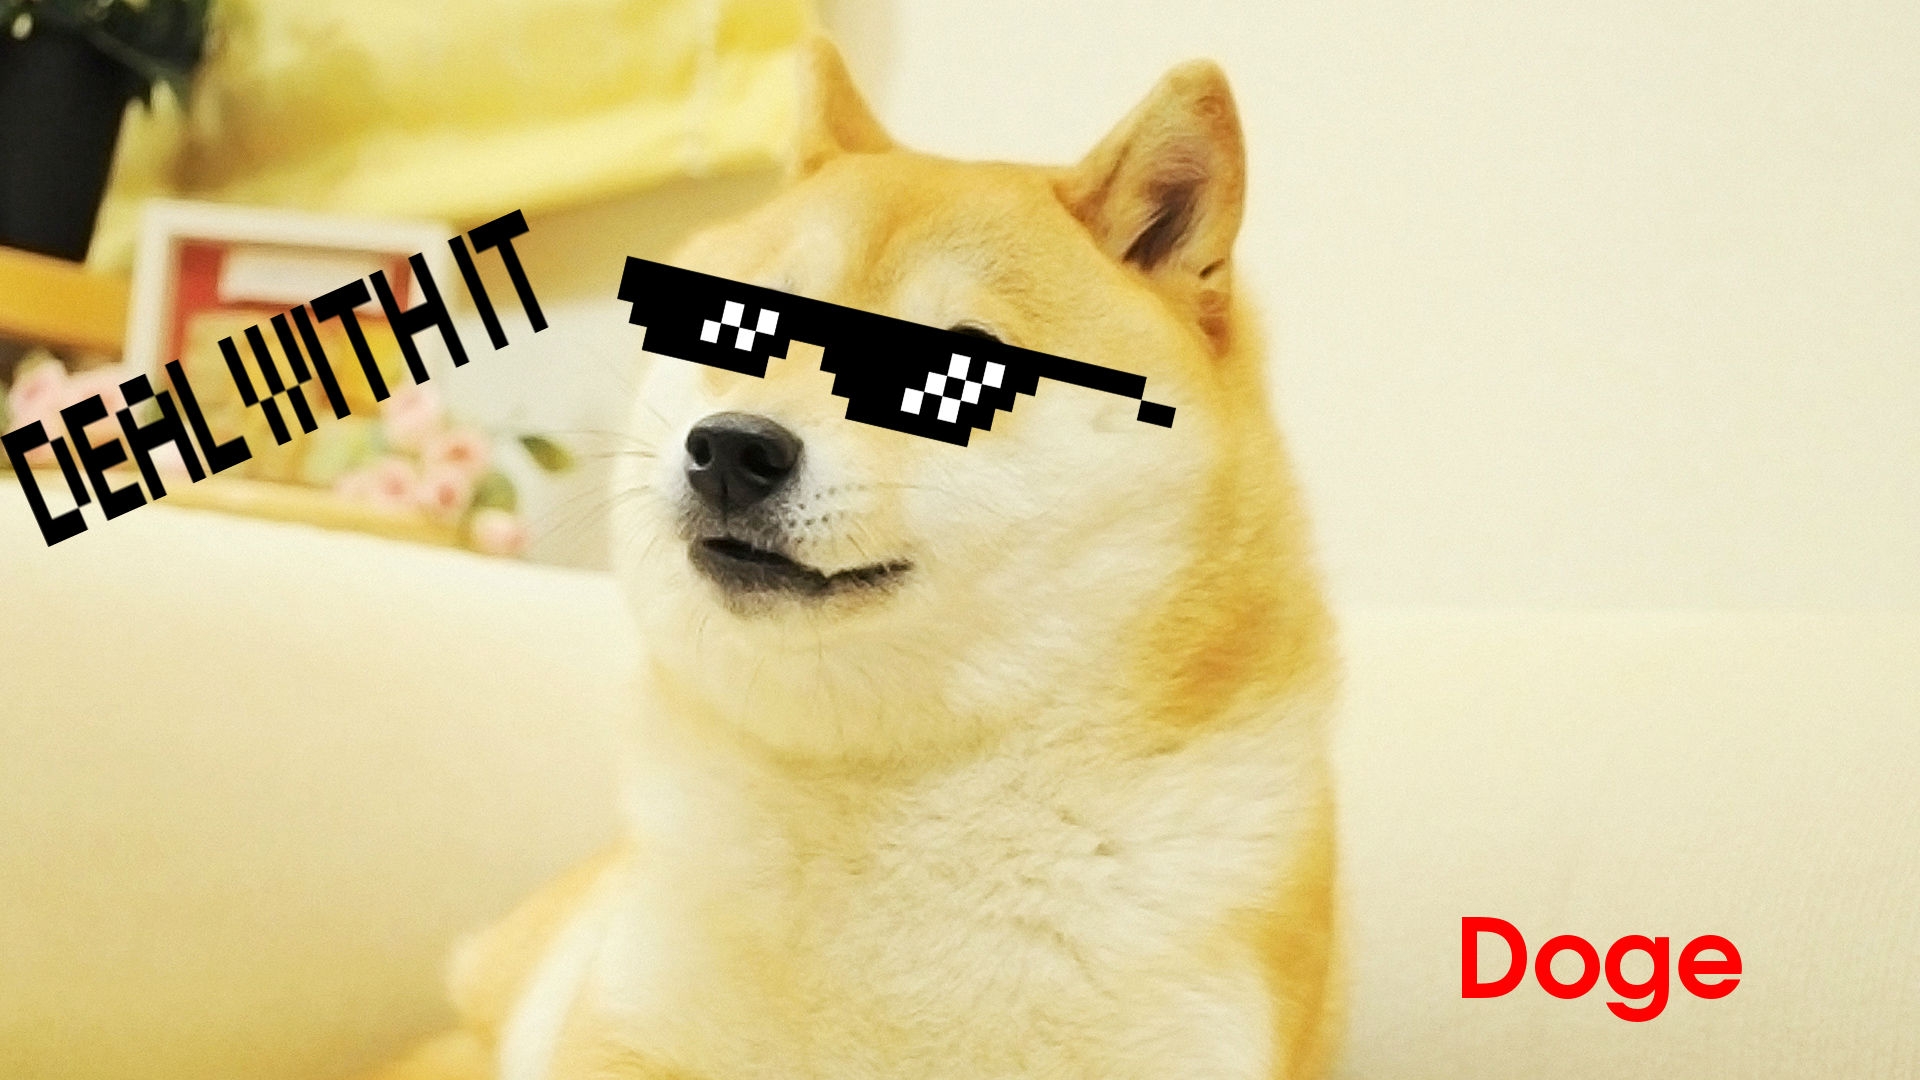 Such swag Doge Wallpaper 1920x1080